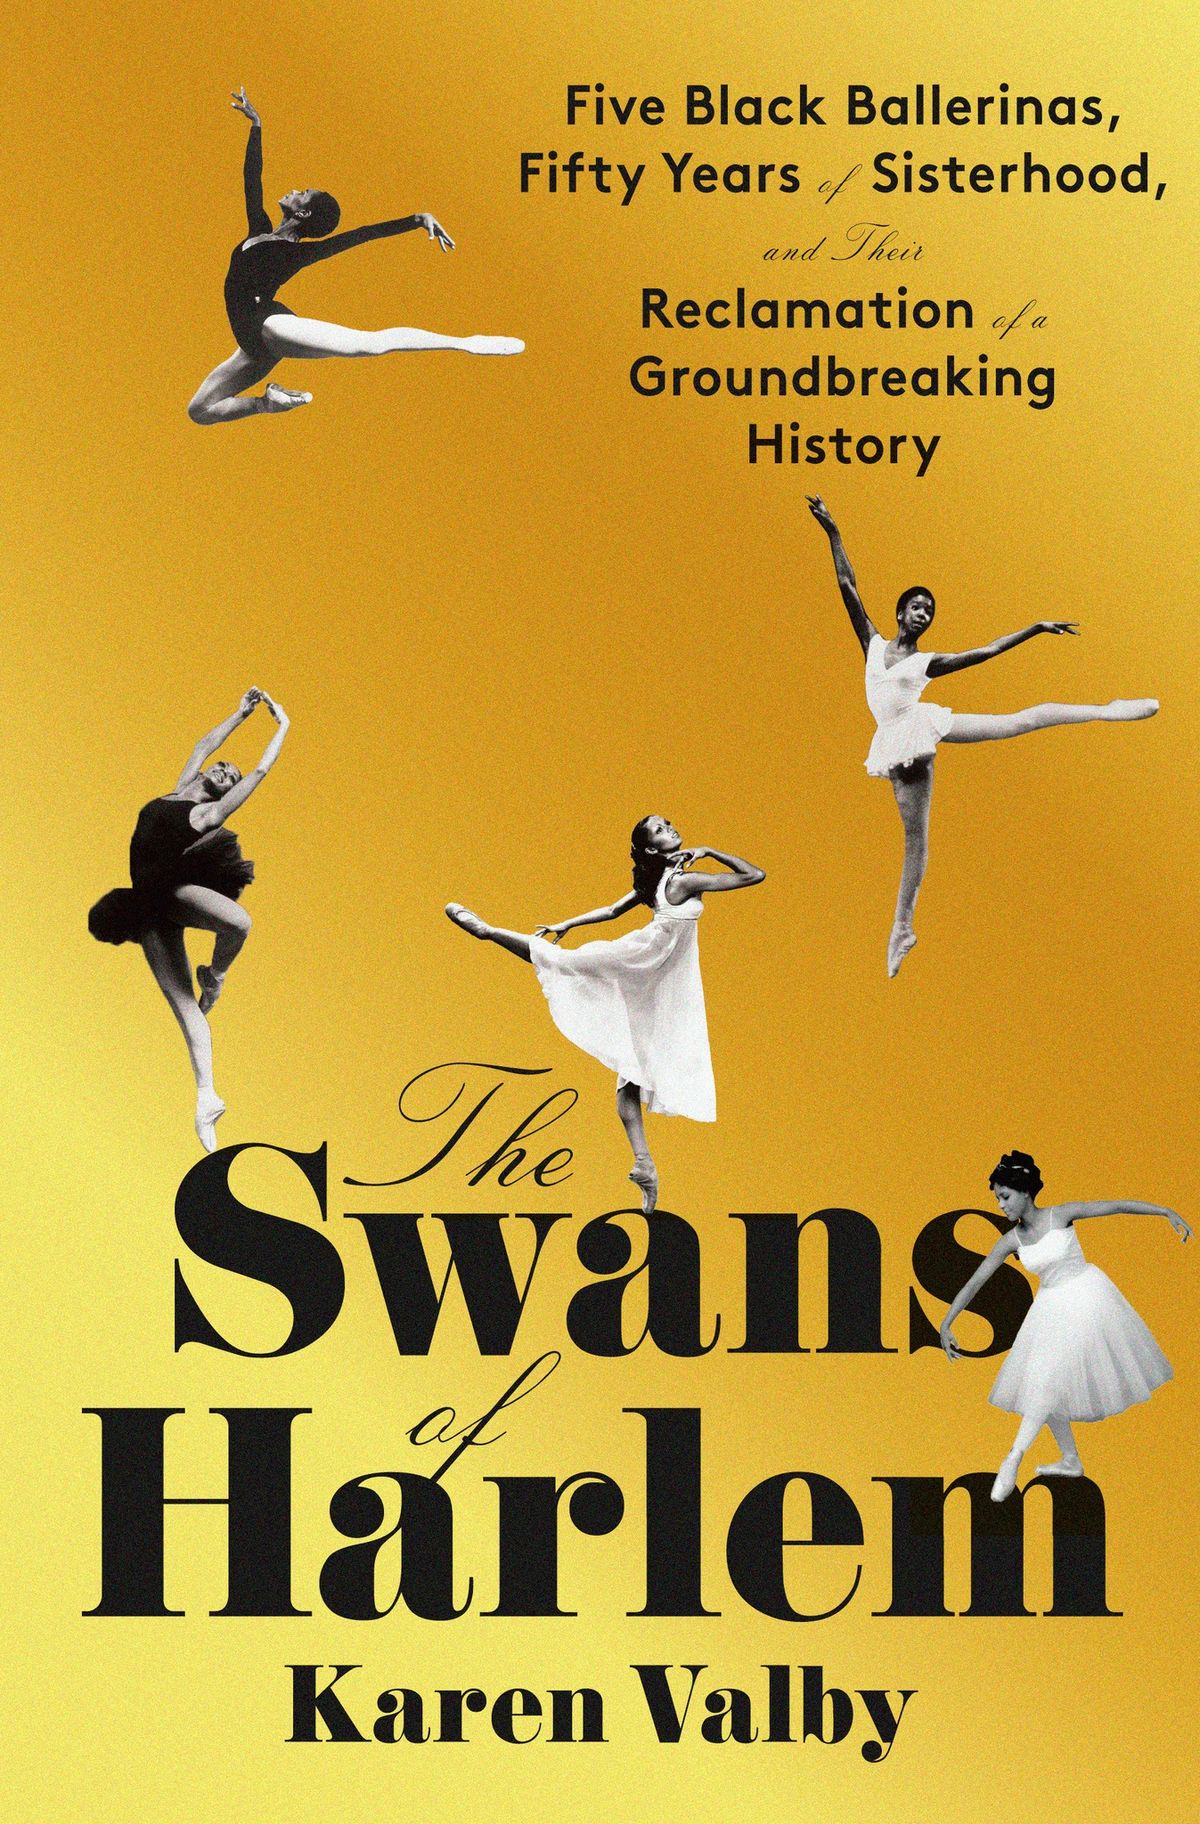 The Swans of Harlem Book Launch with Sheila Rohan and Gabri Christa